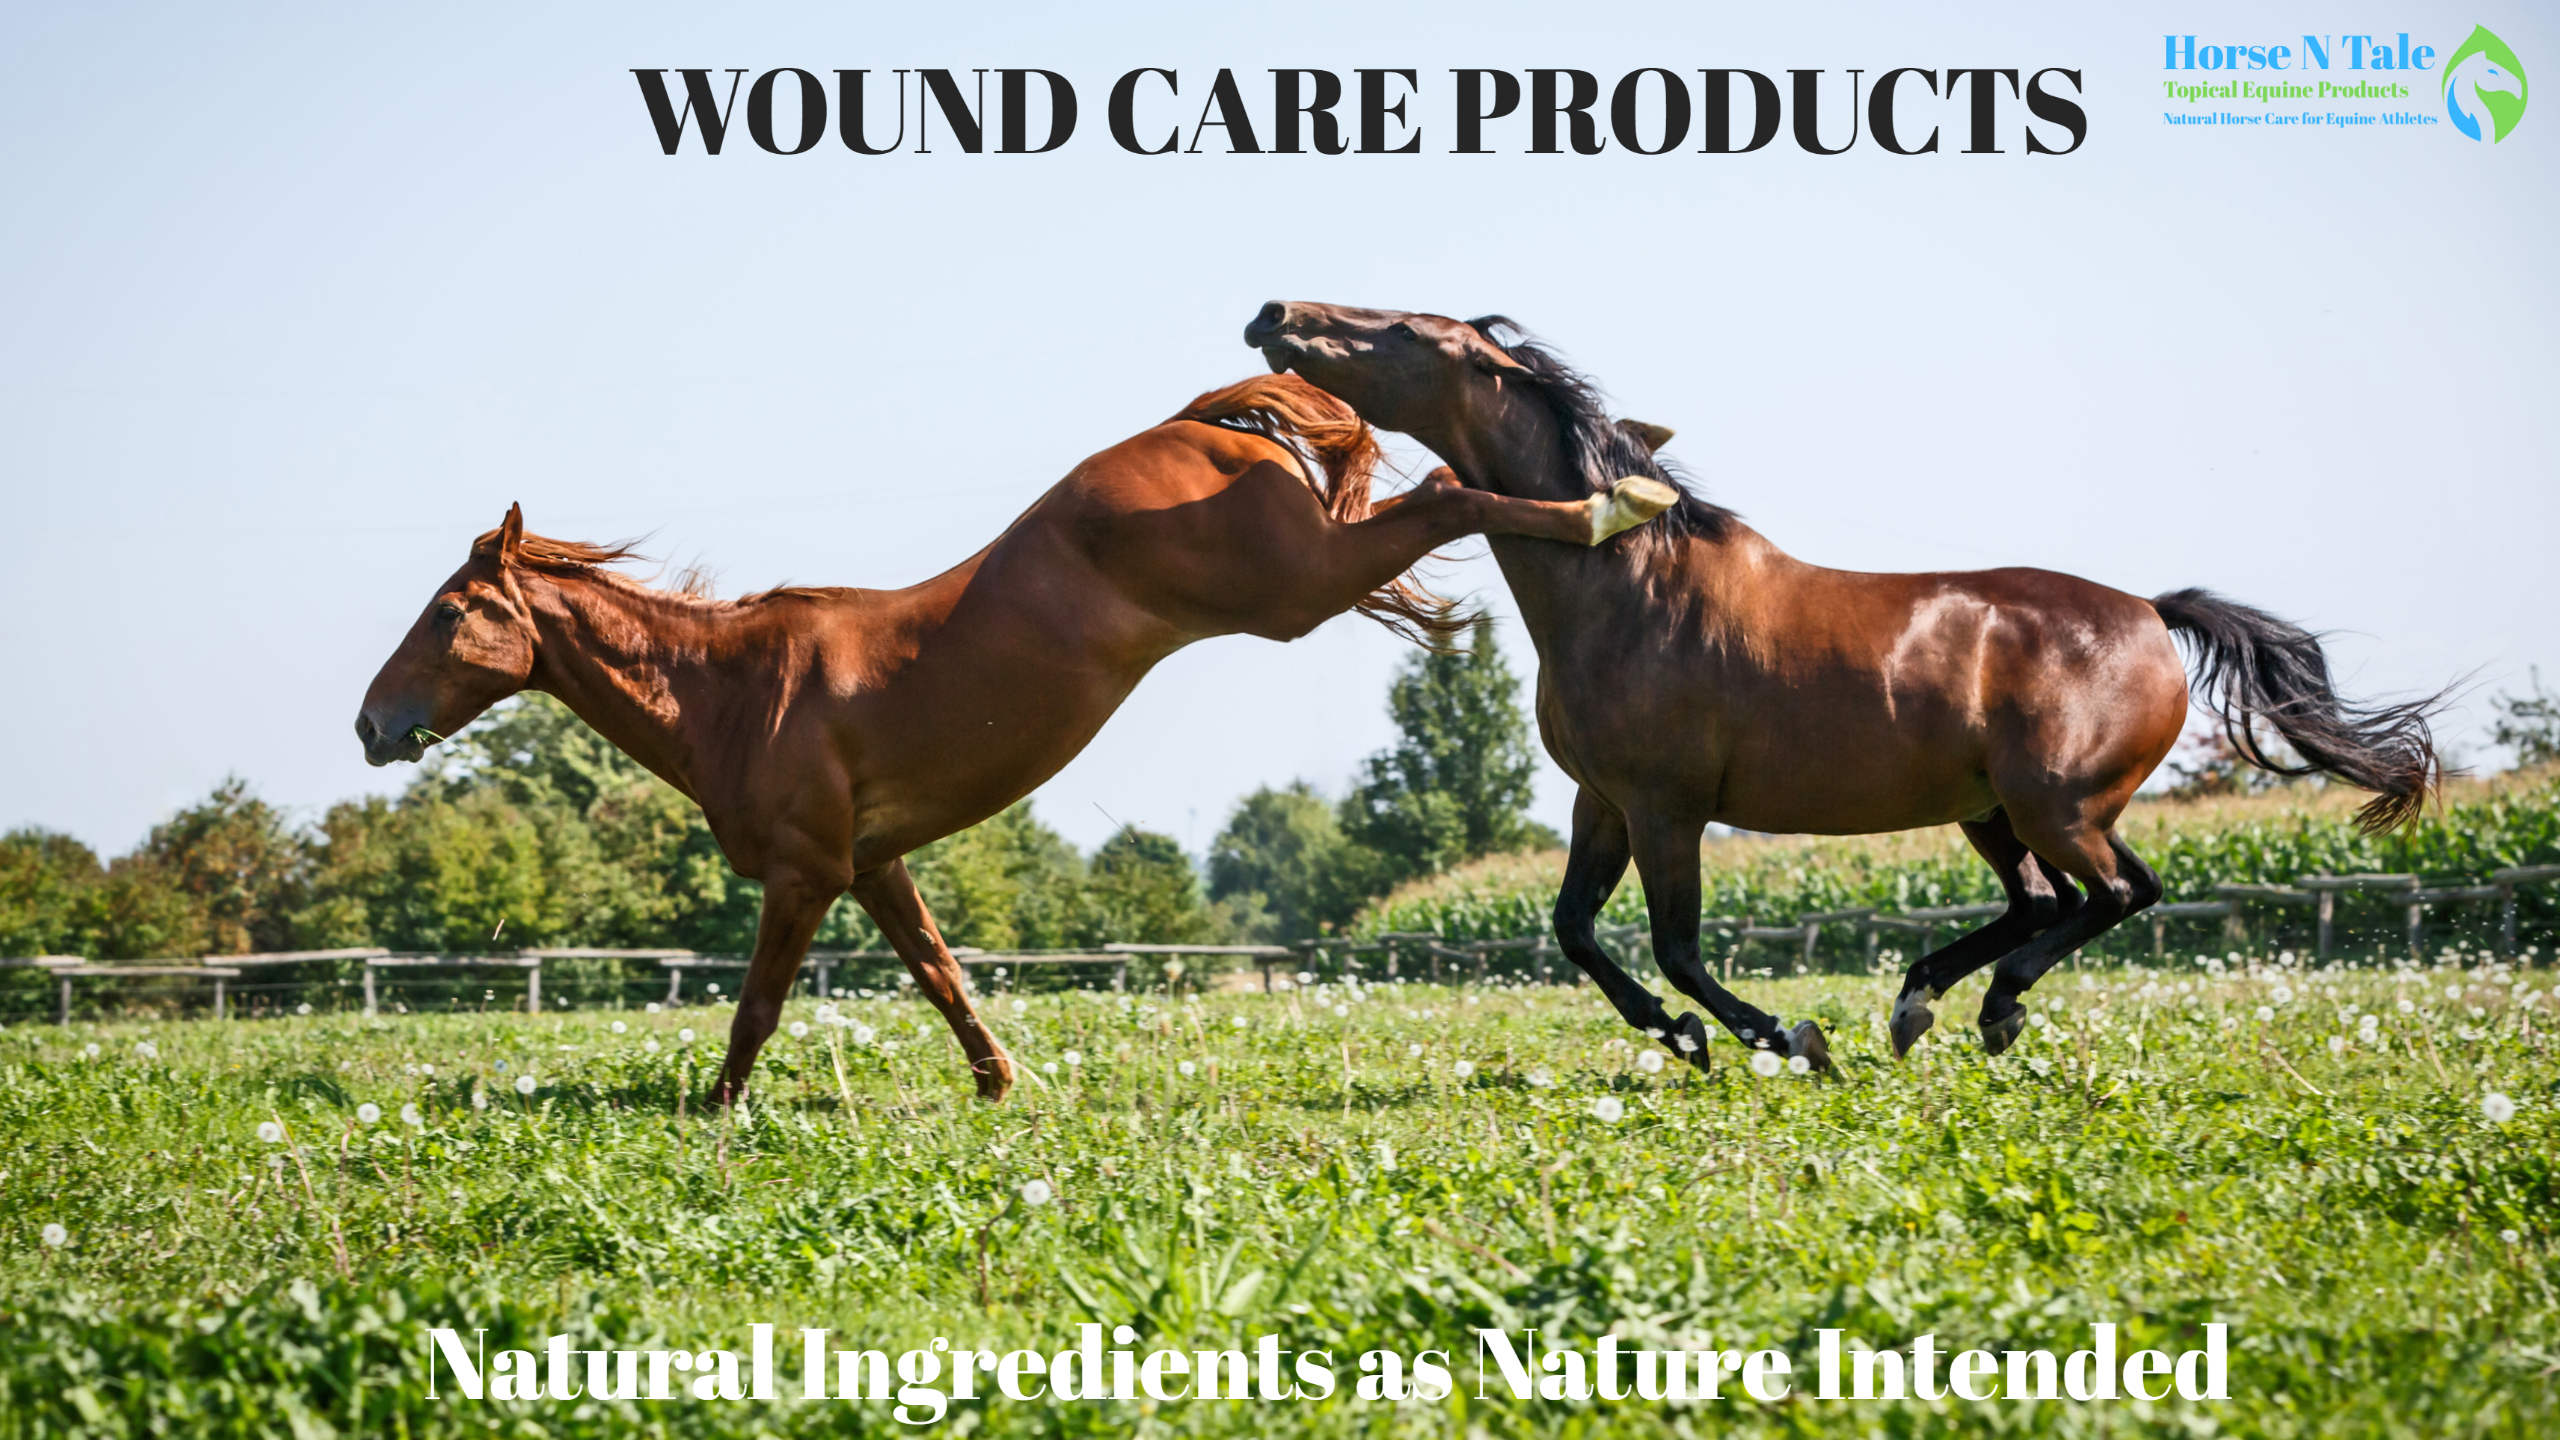 Horse Wound Spray, Horse Wound Ointment, Horse Wound, Wound Spray For Horses, wound spray for horses, horse wound spray, horse wound ointment, wound care, wound care product, horse wound care products, horse wound care, horse wound, equine wound care, horse wound spray, horse wound ointment, horse wound care products, Equine wound, heal Ez, equine wound, horse wound, equine wound care, wound, cuts, wound care products, wound care equine, wound care, Horse N Tale, Horse n Tale Topical Equine Products, topical equine products, natural horse care, horse supplies, Horse products, Horse n tale, topical equine products, natural horse care, horse products, horse supplies, topical equine products, natural products, botanical products, Horse N Tale, Horse n Tale Topical Equine Products, topical equine products, natural horse care, horse supplies, Horse products, natural ingredients, natural ingredients as nature intended, Heal Ez, Wound care, equine wound care, horse wound, equine wound product, wound, cut, wound care equine, equine wound care heal ez, Equine Wound Care Heal Ez, equine wound care products, wound care for horses legs, antiseptic cream for horses, horse wound care spray, horse wound healing, spray for horses wounds, equine wound management, best ointment for horse wounds, equine wound spray, horse ointment for cuts, equine wound care, cut and heal for horses, best wound care for horses, horse wound care, horse wound spray, horse wound ointment, horse wound, horse wound care products, horse wound treatment, wound cream for horses, Equine Wound Care, Equine Wound, heal Ez, equine wound, horse wound, equine wound care, wound, cuts